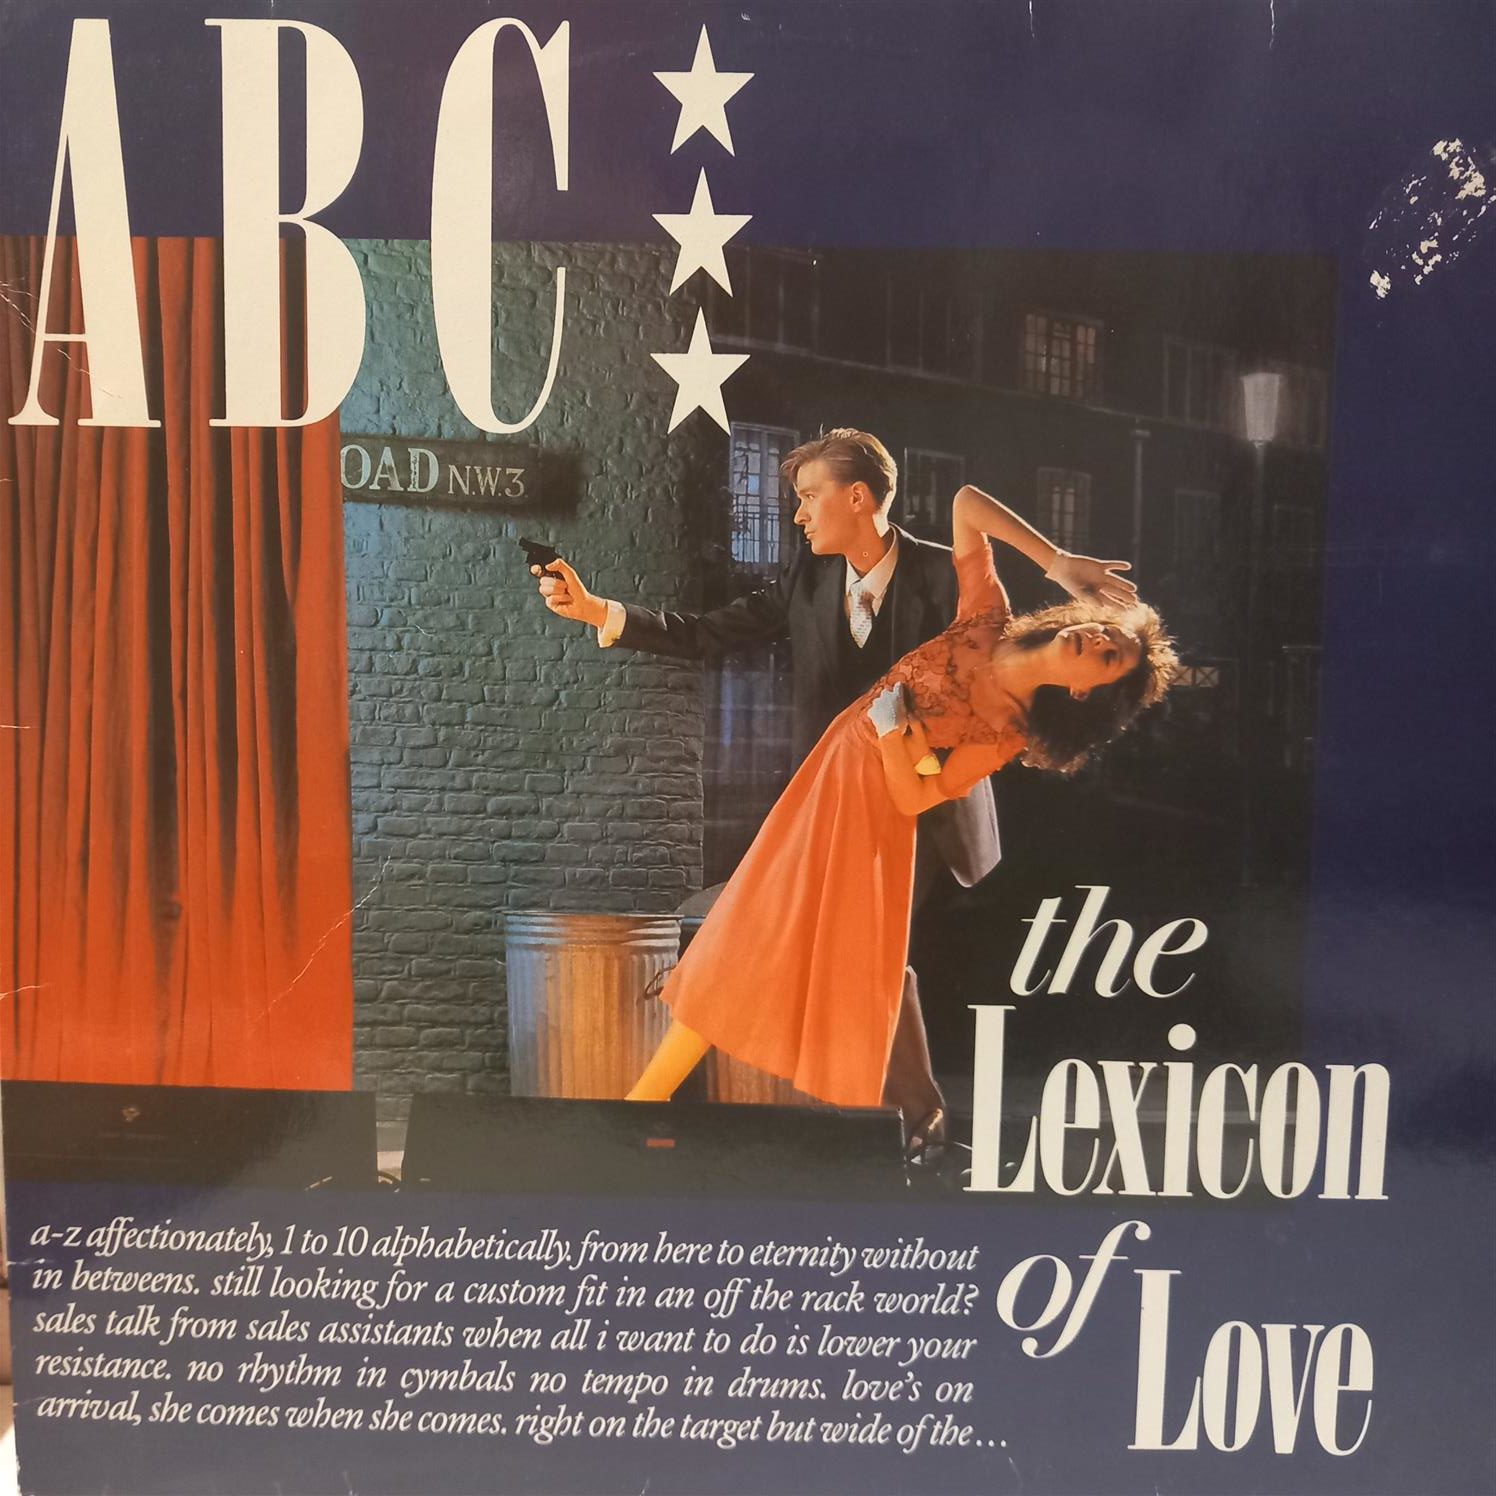 ABC – THE LEXICON OF LOVE ON